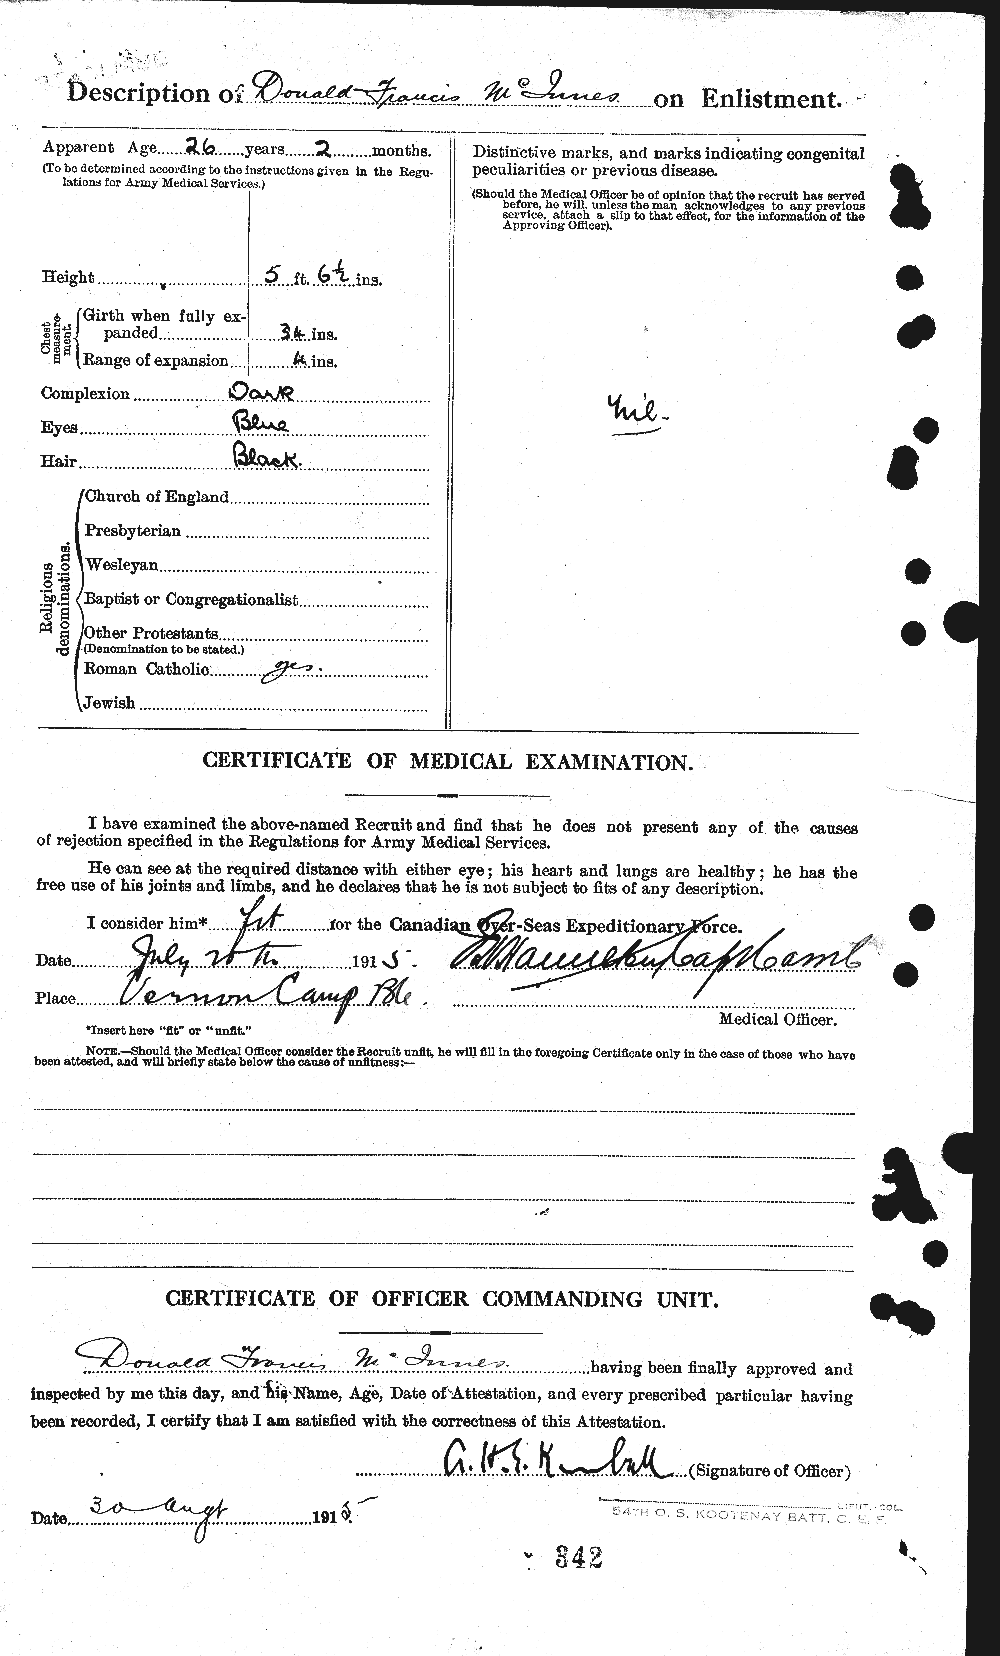 Personnel Records of the First World War - CEF 526633b